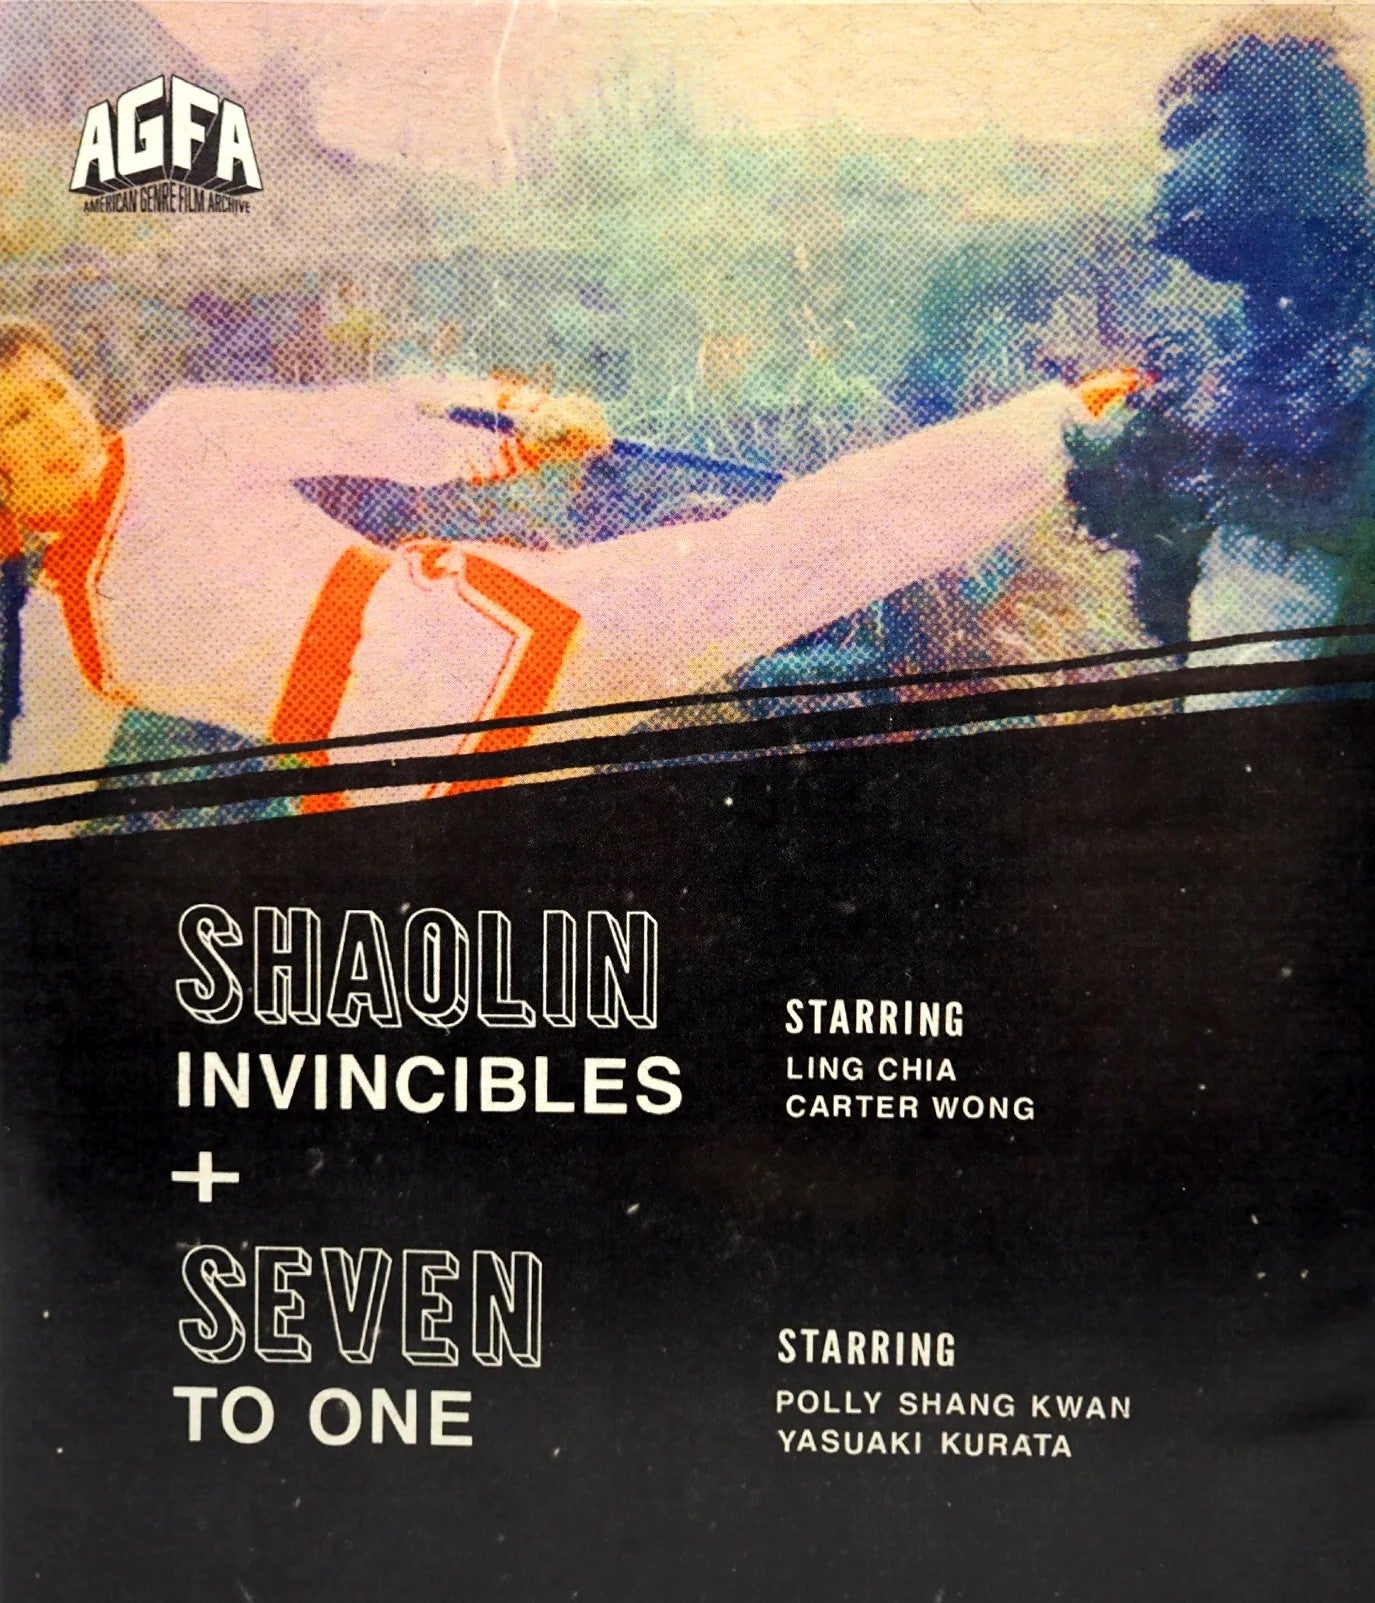 SHAOLIN INVINCIBLES / SEVEN TO ONE BLU-RAY